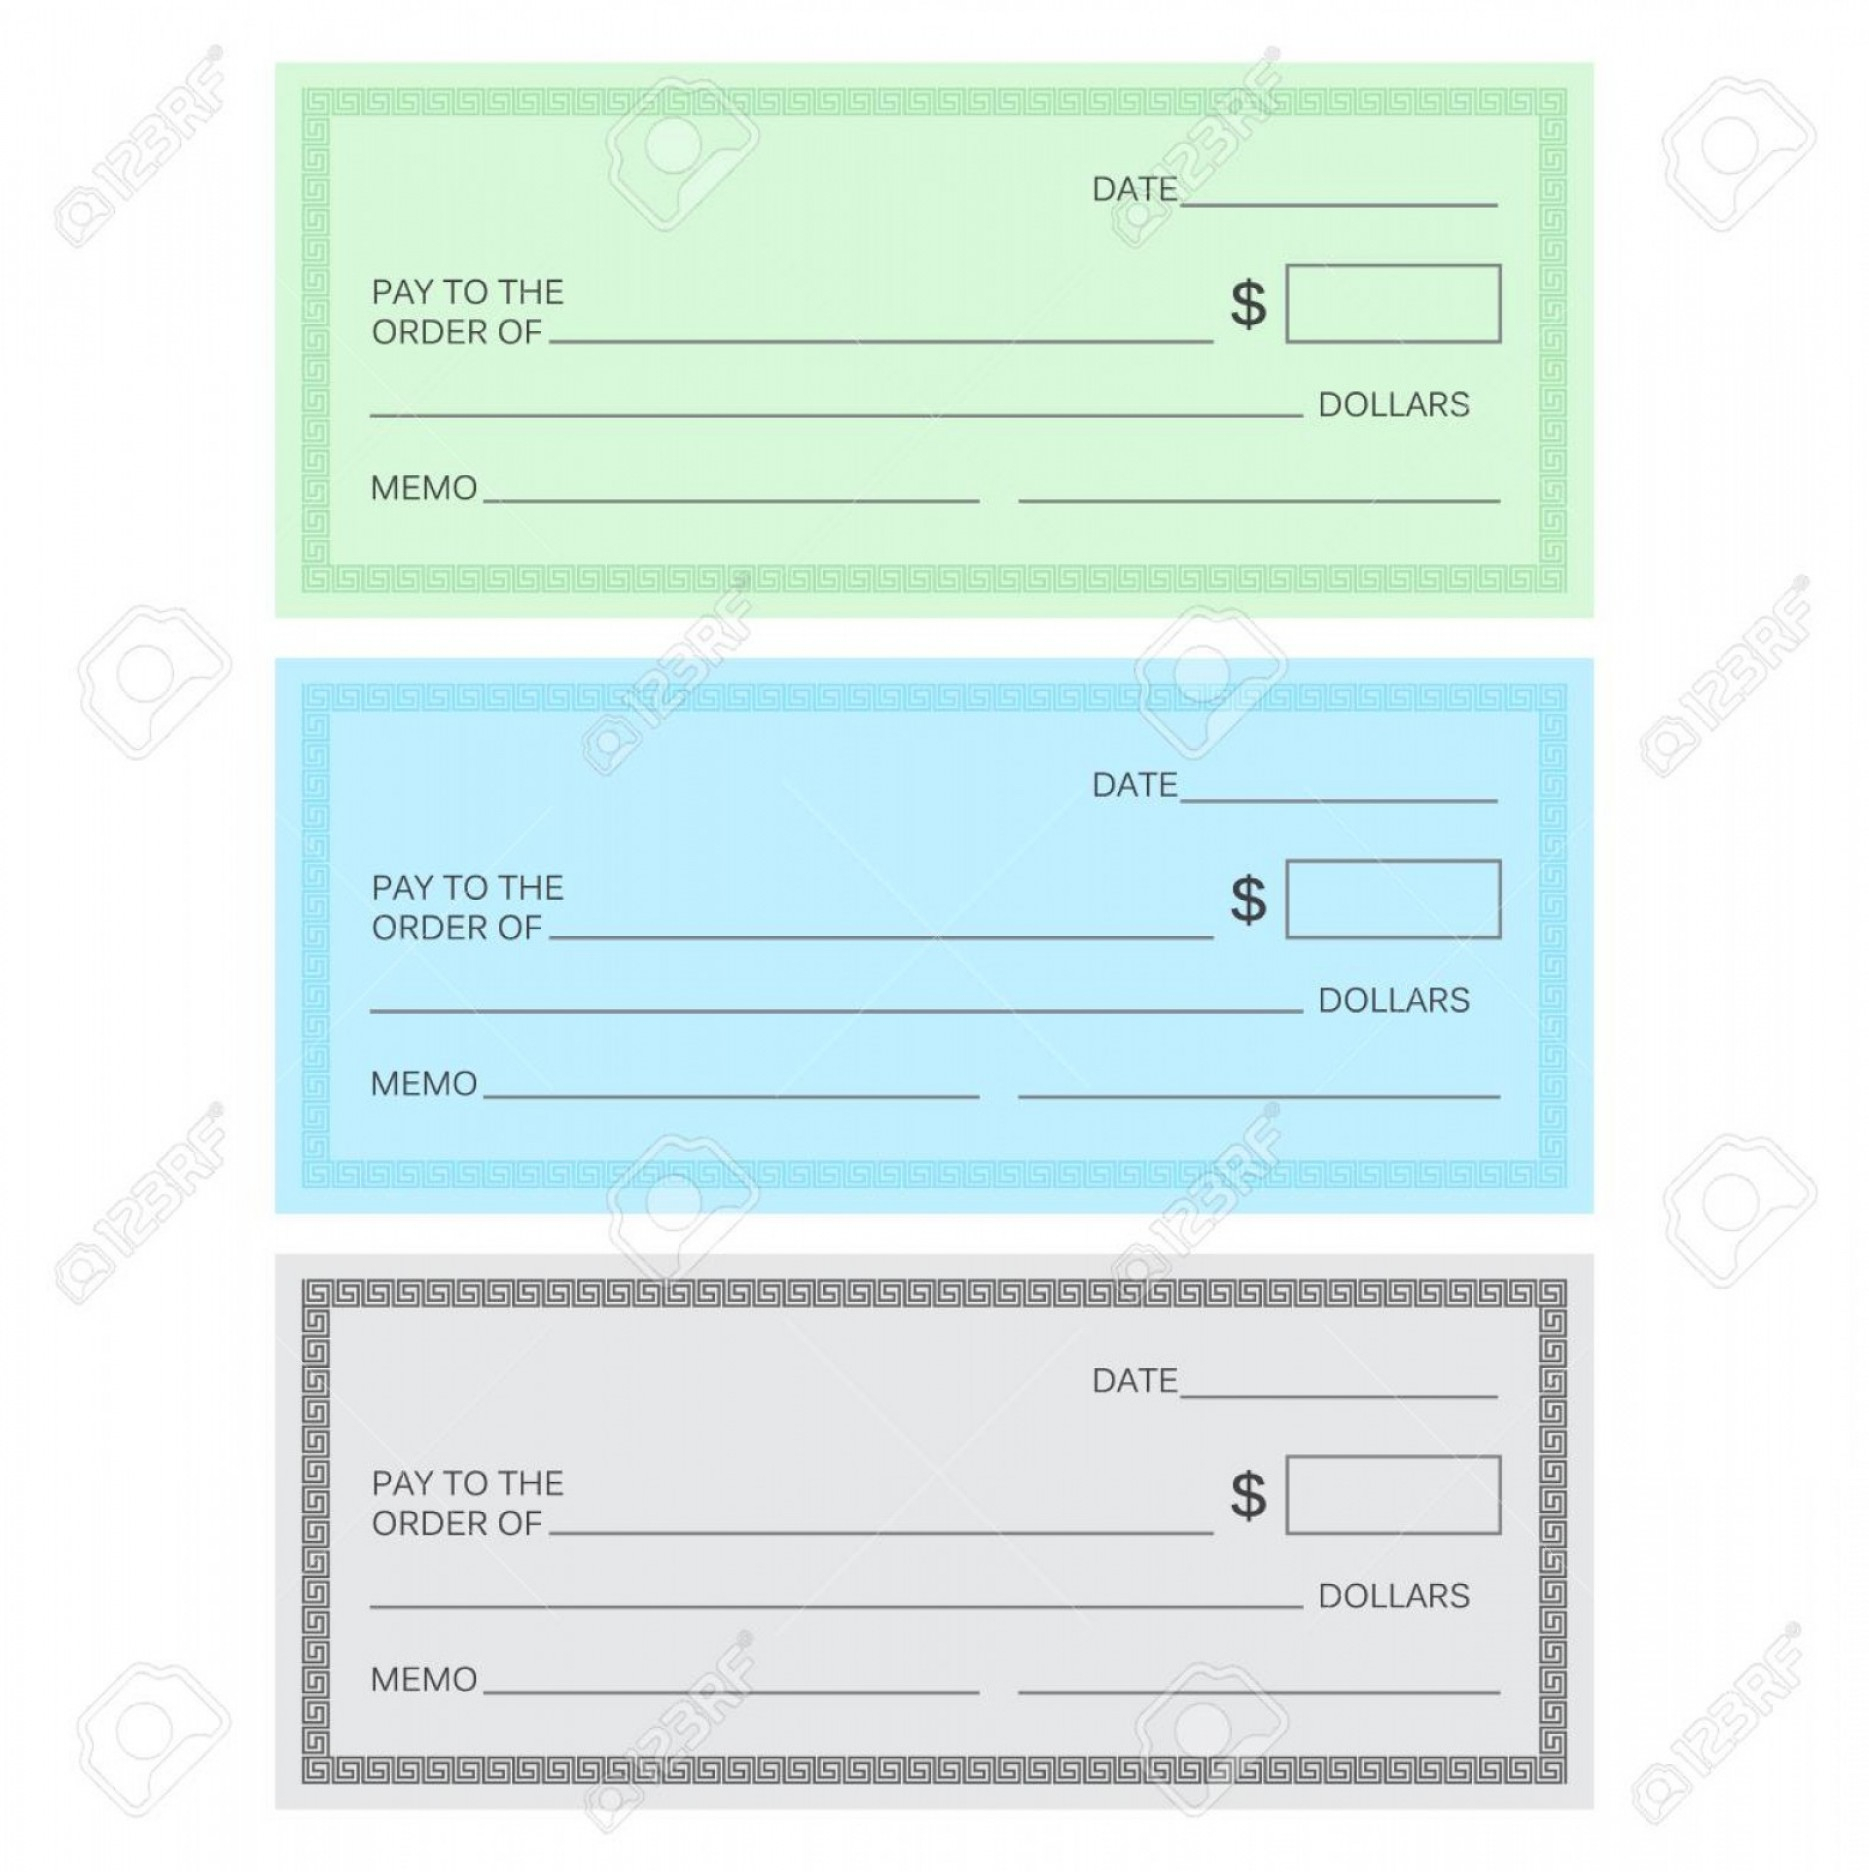 031664C Presentation Cheque Template | Wiring Resources With Large Blank Cheque Template